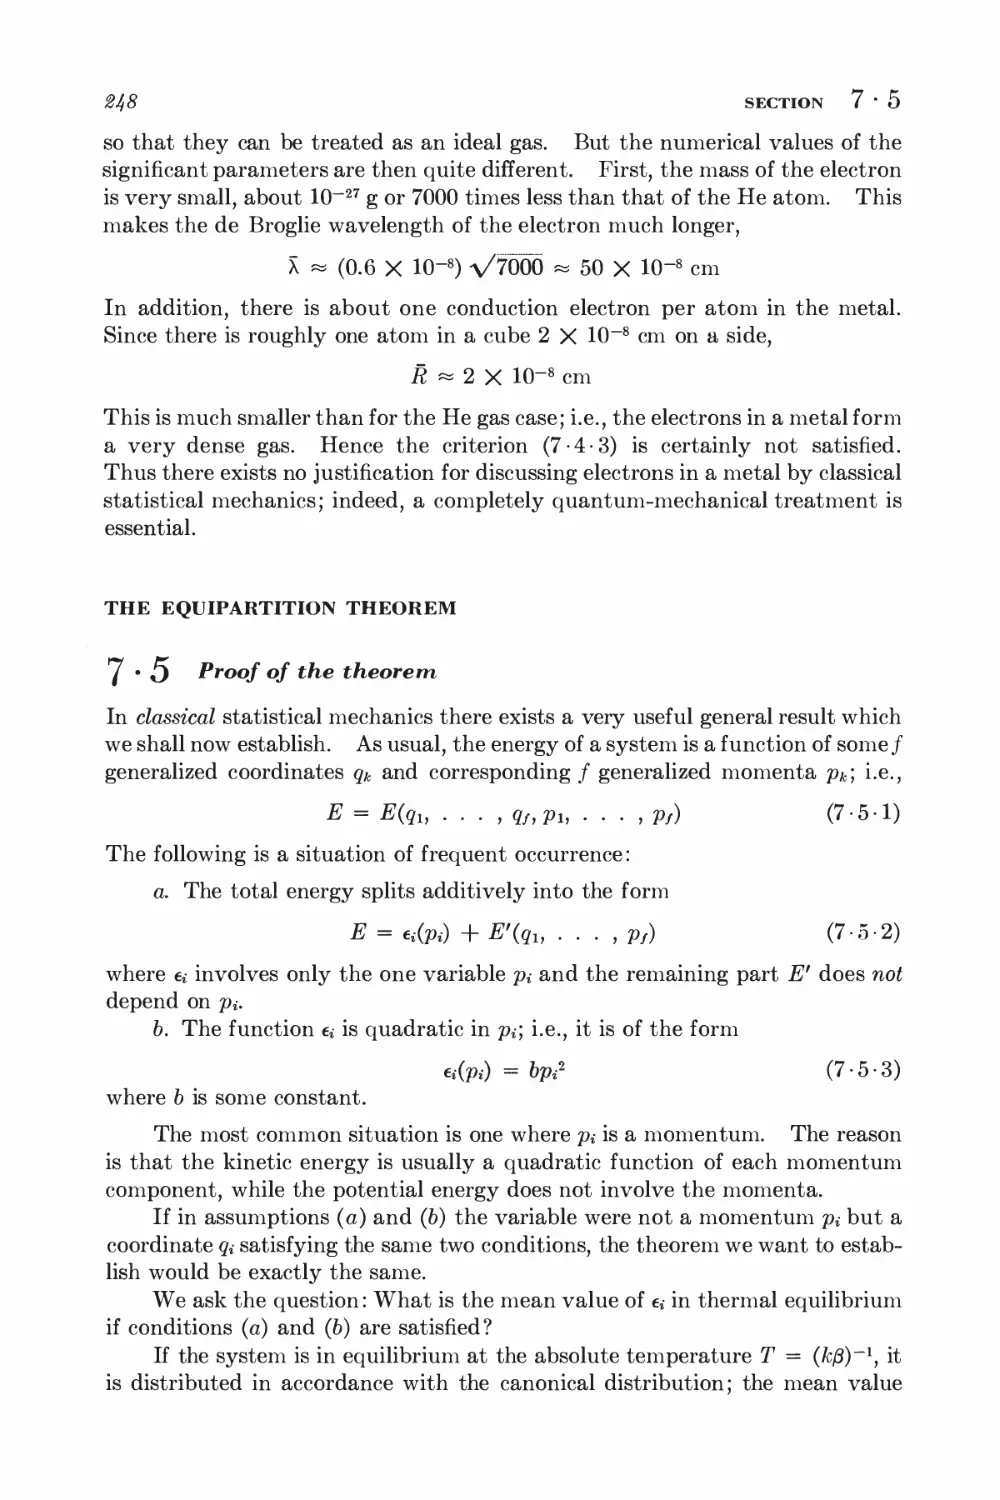 The Equipartition Theorem